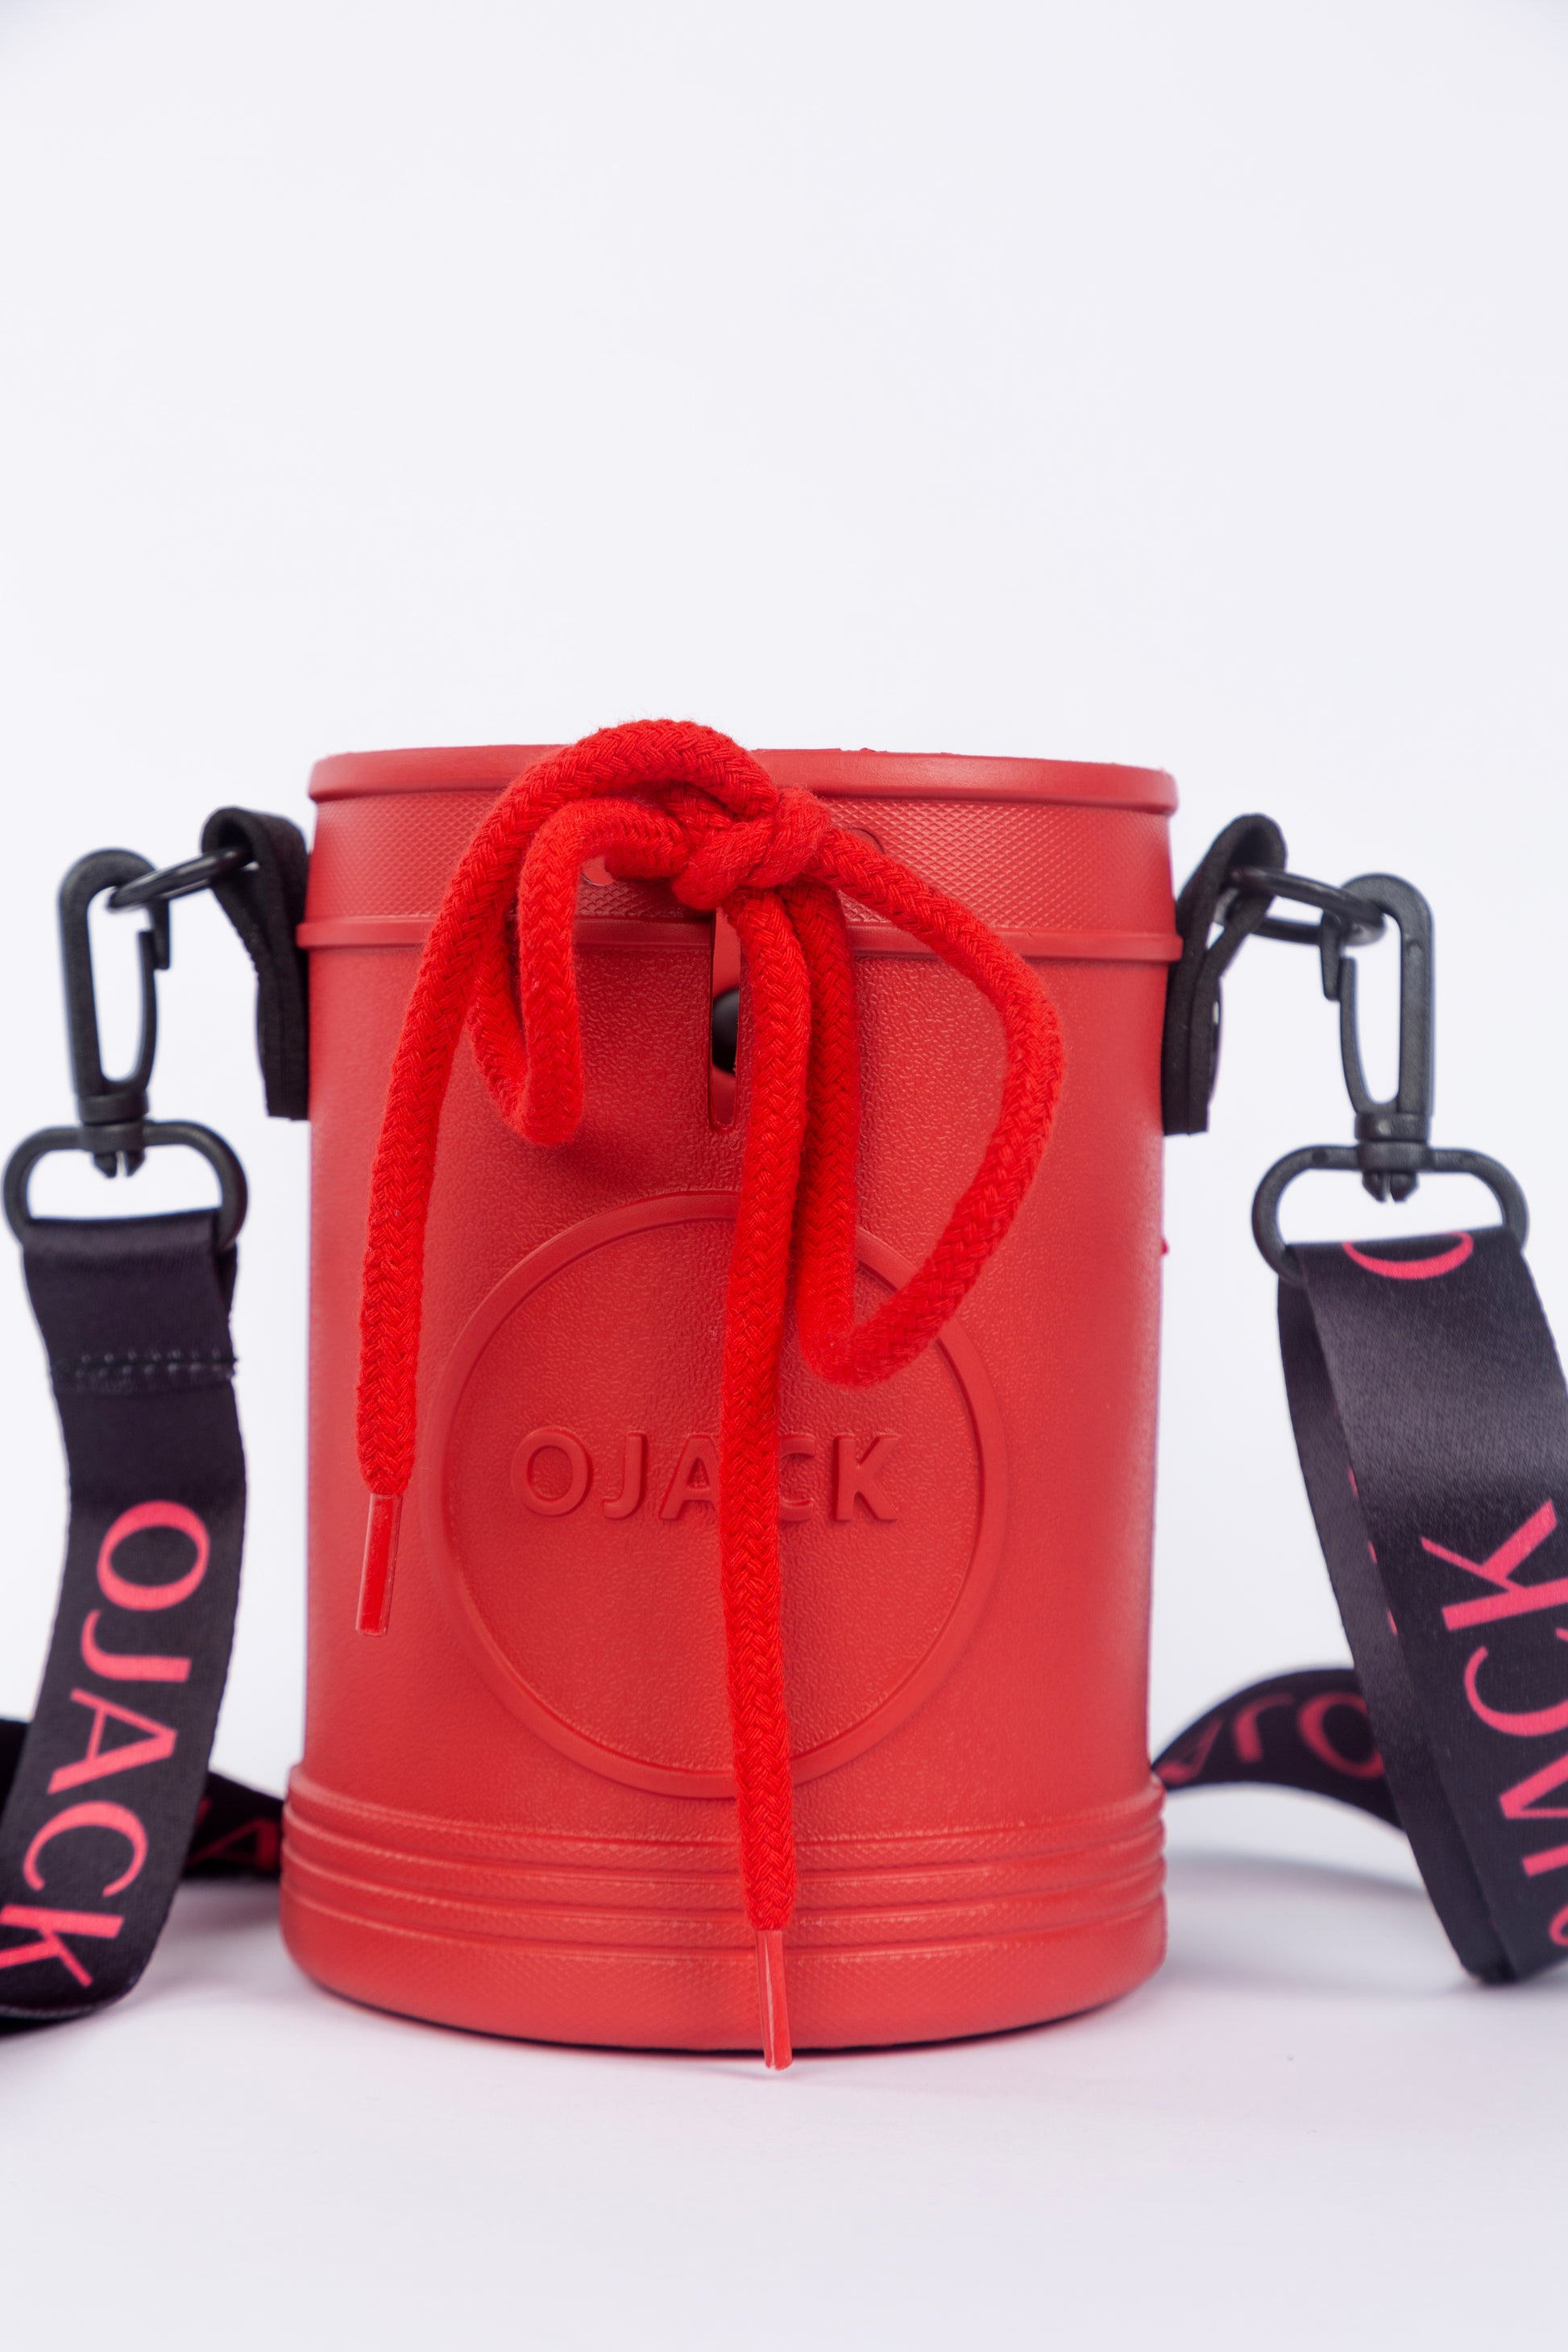 OJACK Water Bottle Holders: Hydration, Learning and Creativity